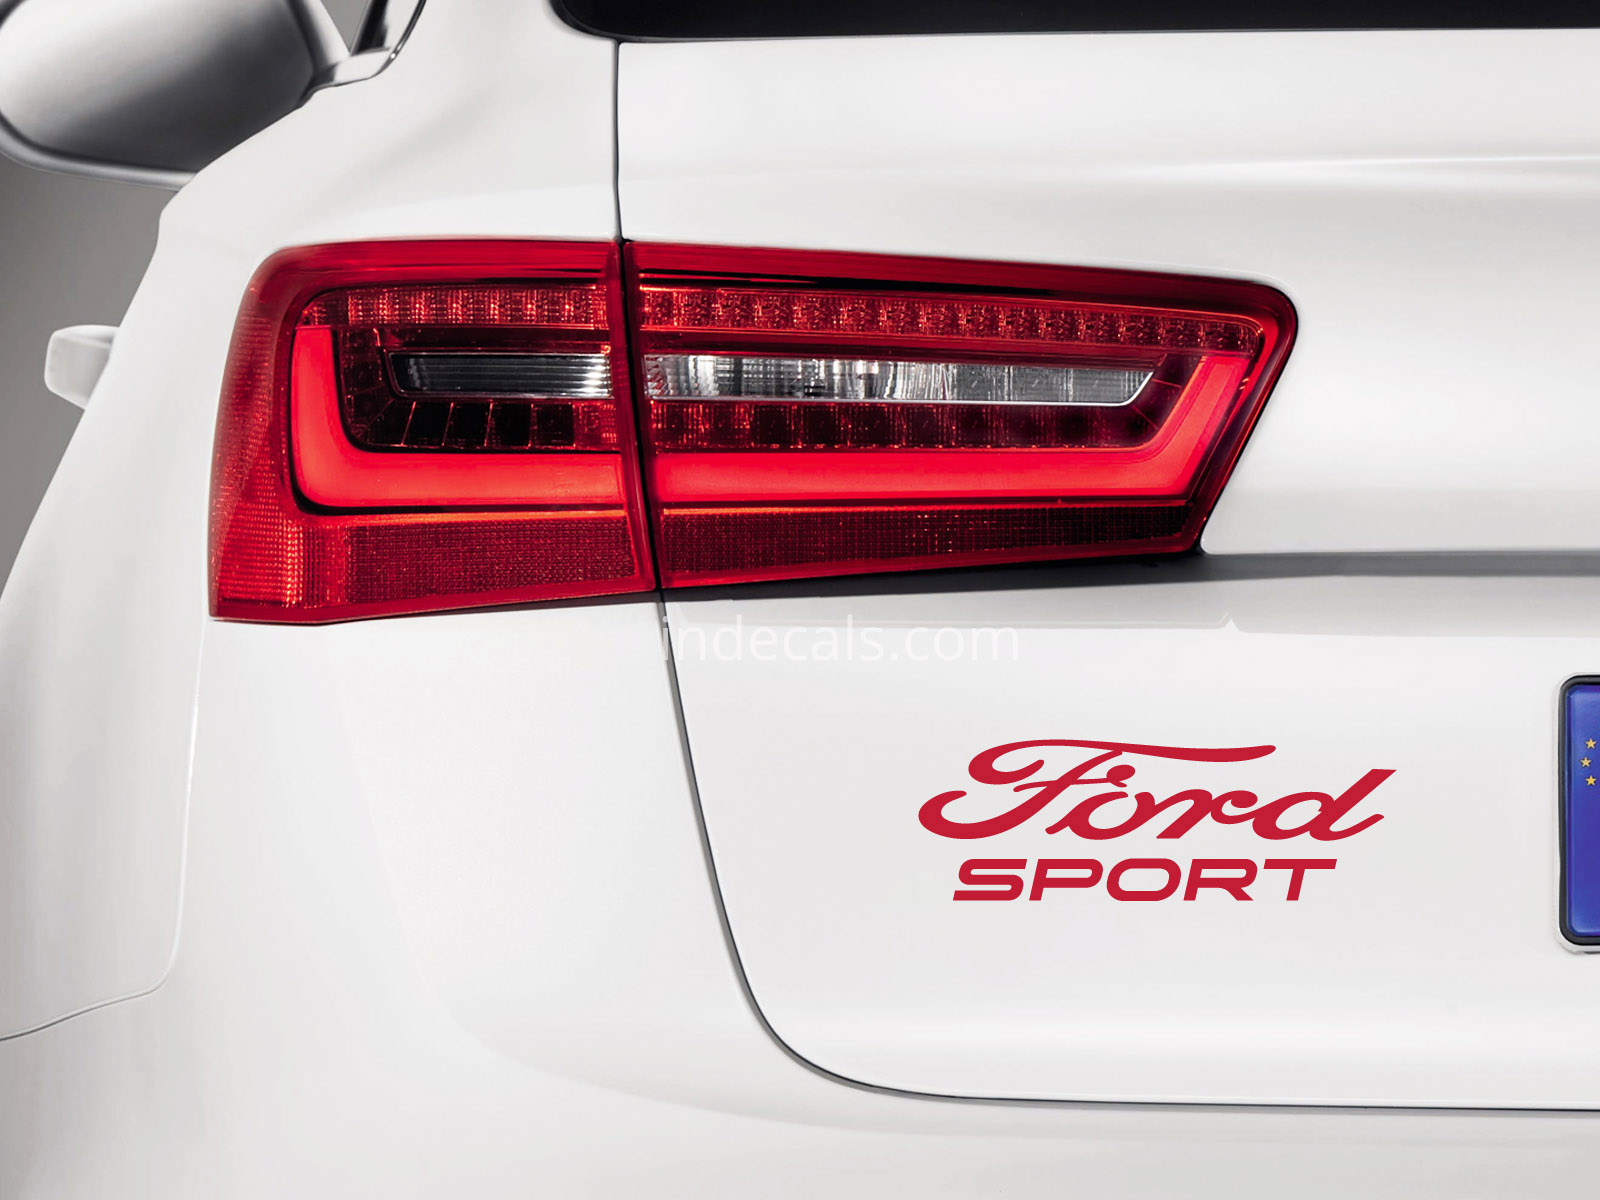 1 x Ford Sports Sticker for Trunk - Red